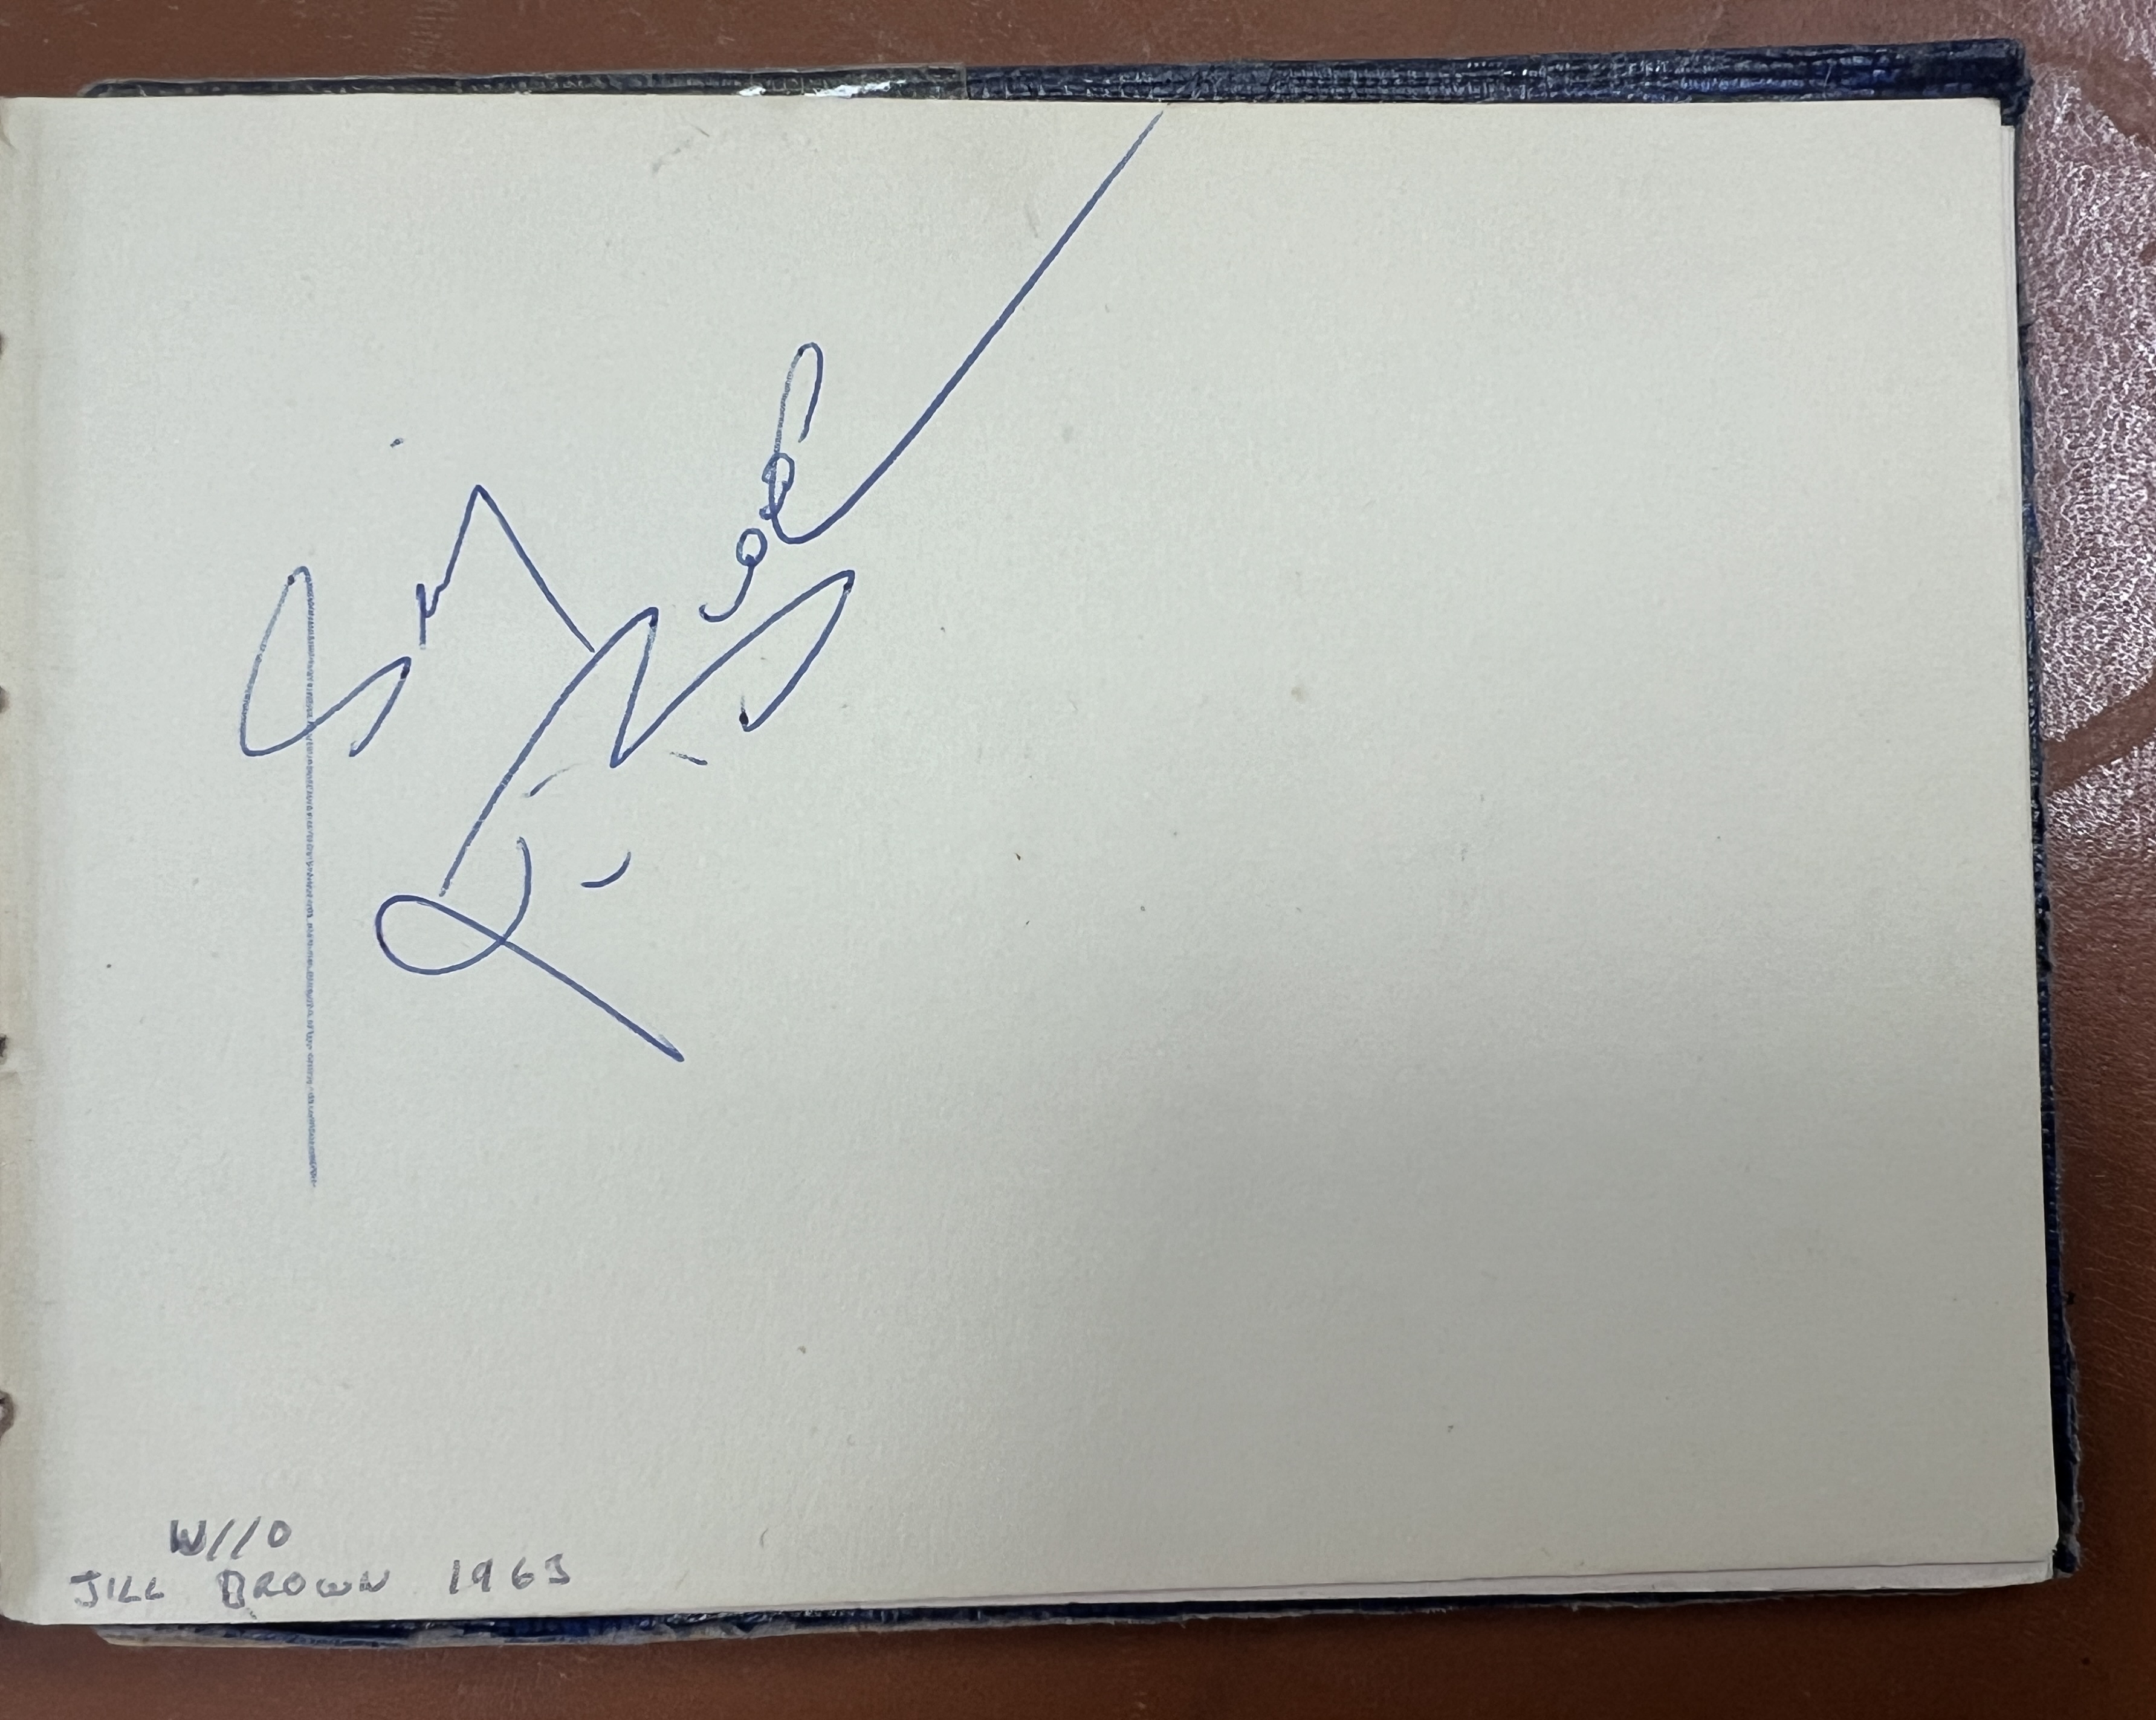 A 1960's autograph album containing autographs of various celebrities including Cliff Richard, - Image 30 of 37